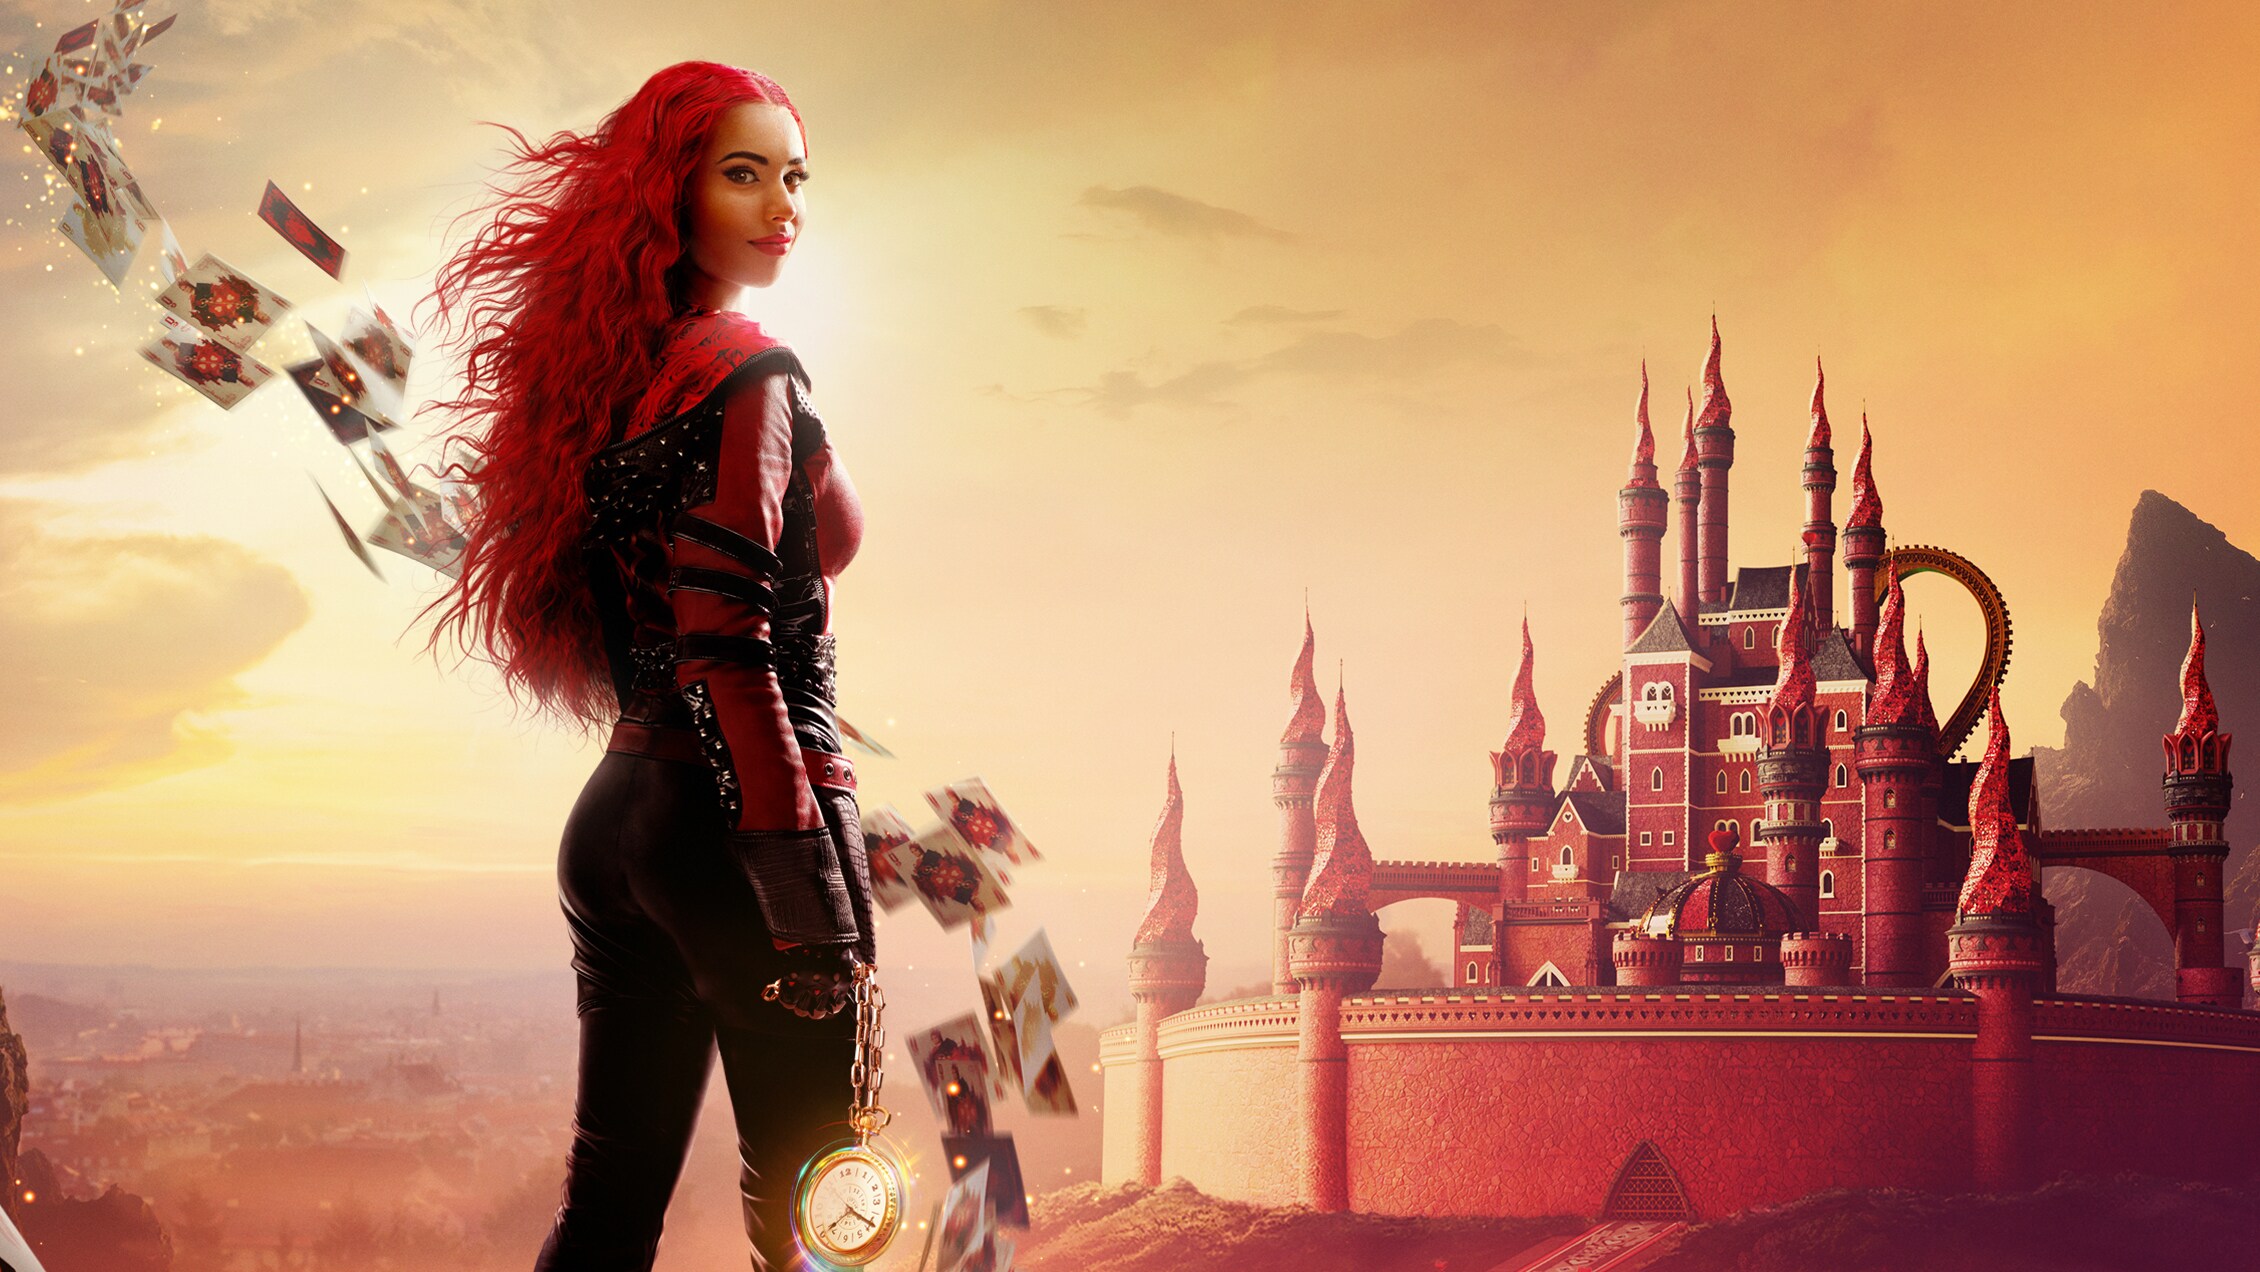 Descendants: The Rise of Red Teaser Trailer Introduces Daughters of Queen of Hearts and Cinderella